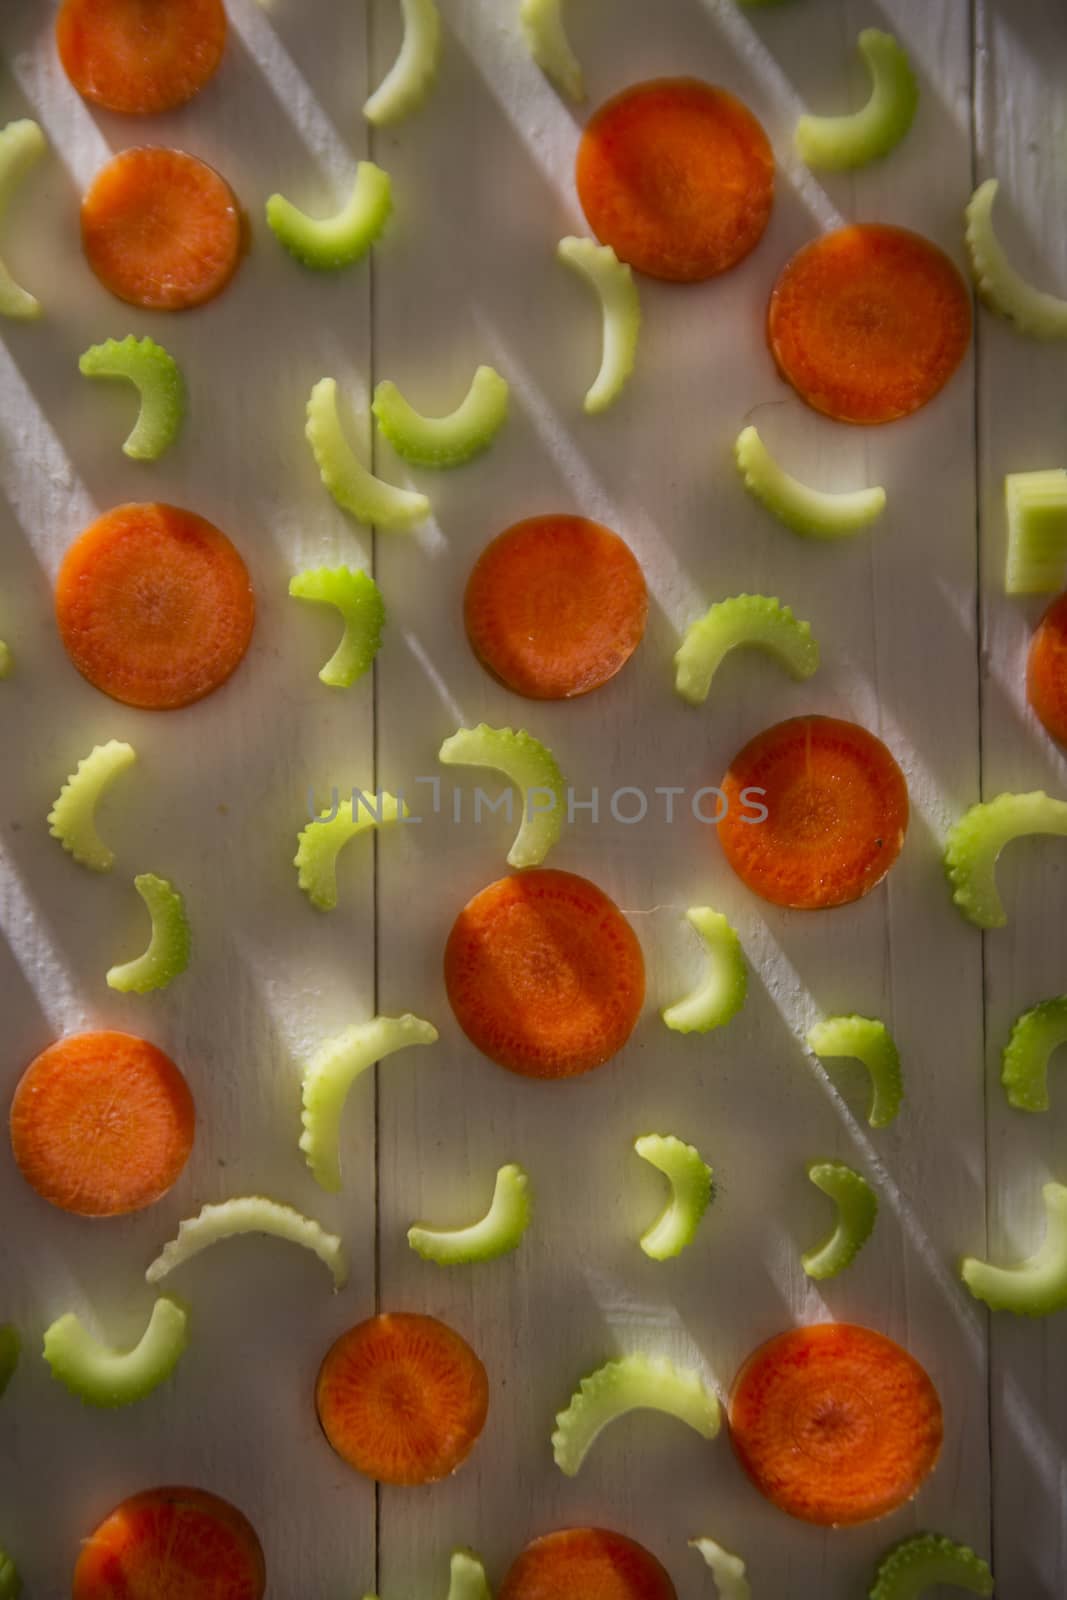 Celery and carrots by fotografiche.eu